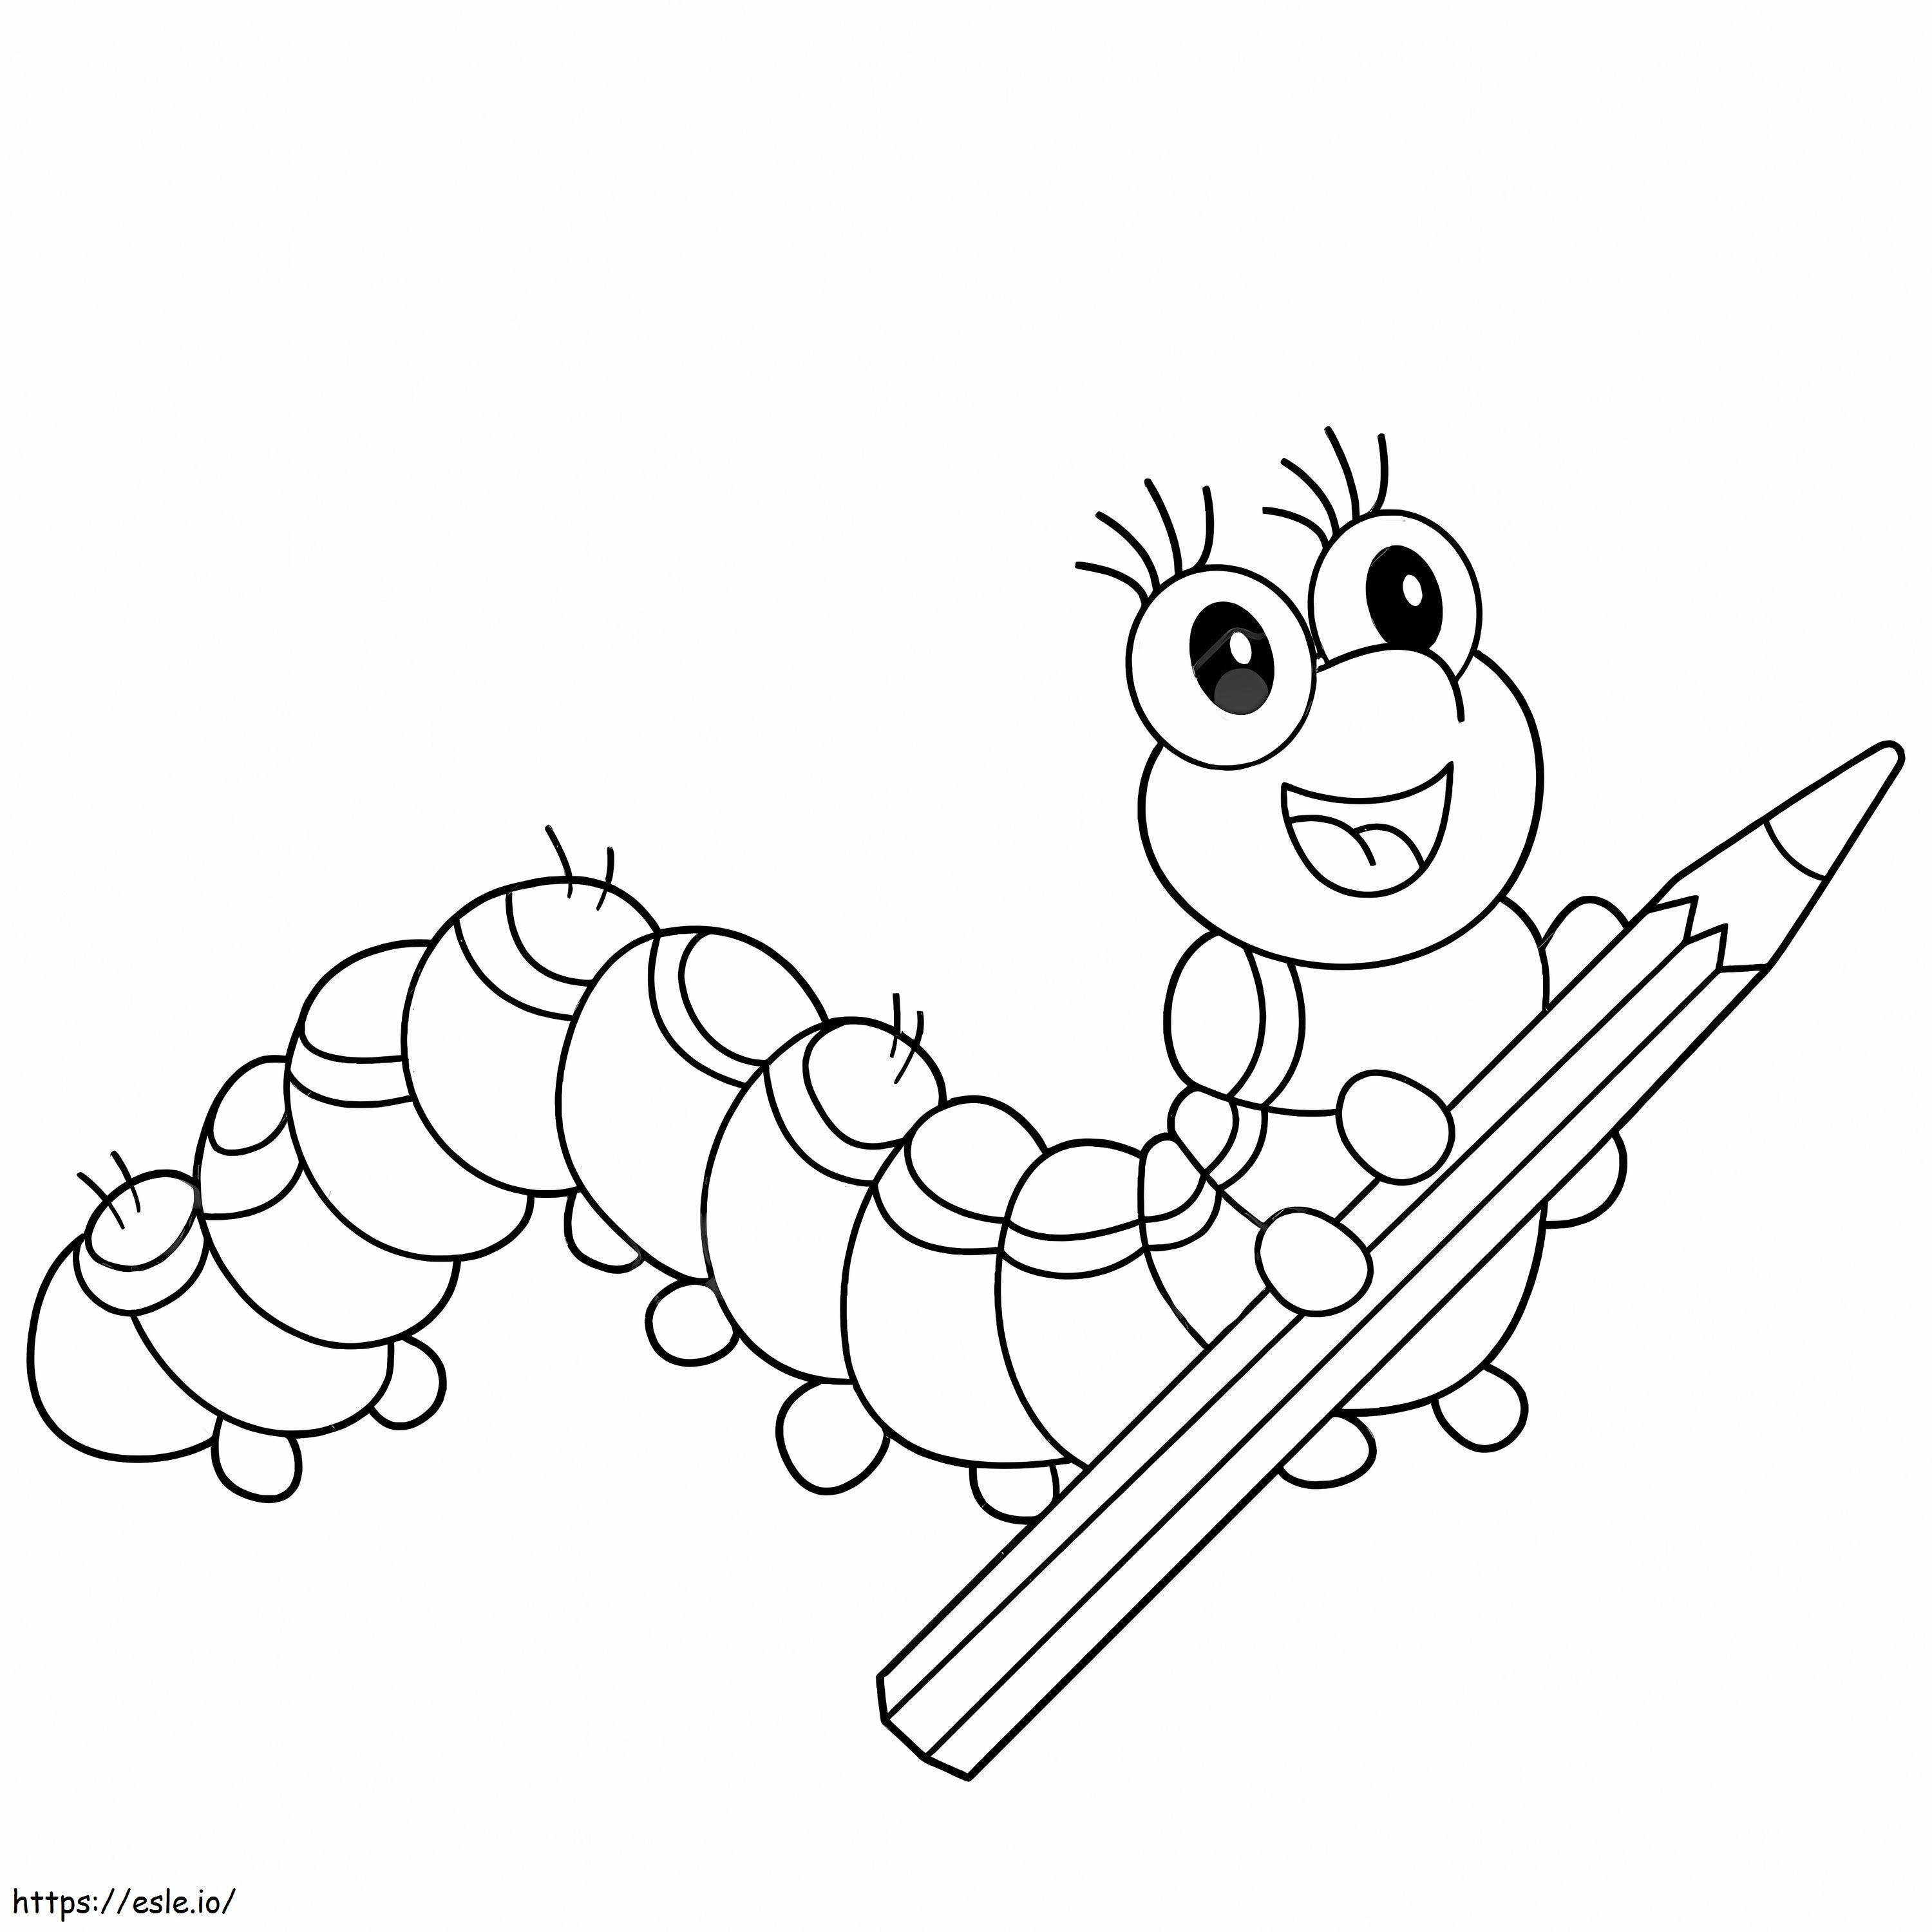 Worm Holding A Pencil coloring page